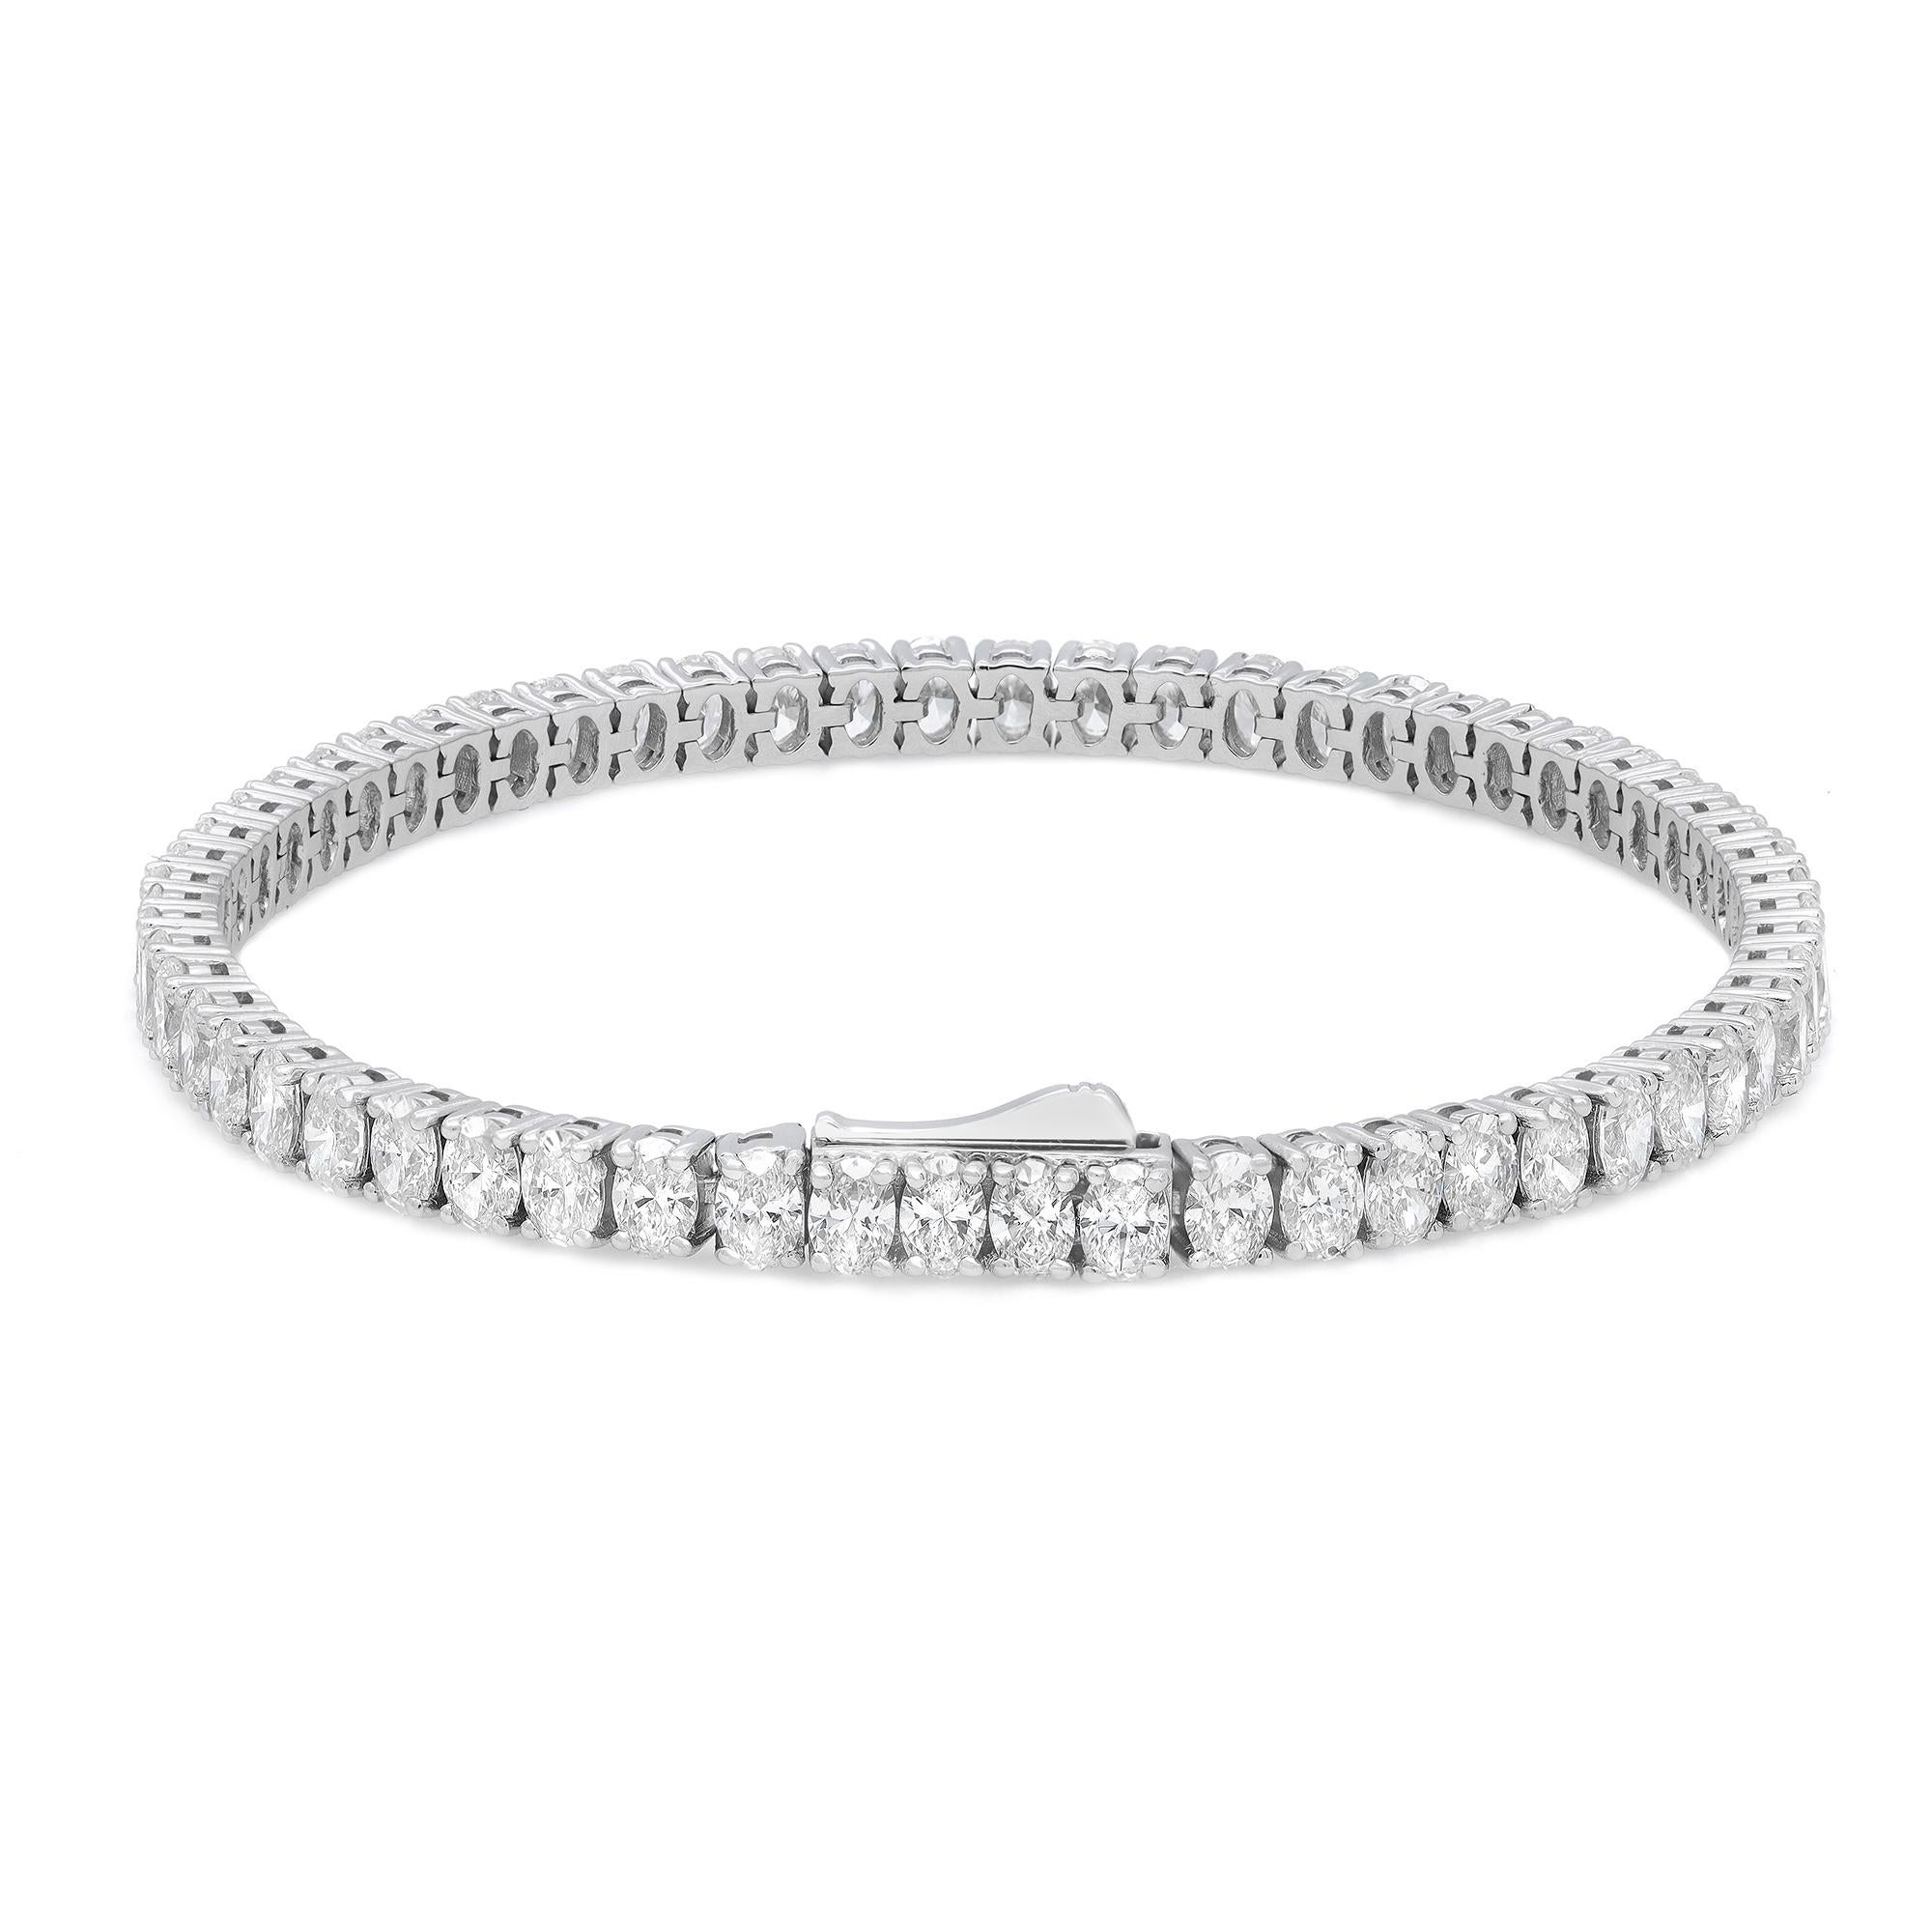 Get a classic look with easy elegance. This diamond tennis bracelet  expertly crafted in 18K white gold. Features 60 prong-set dazzling oval cut diamonds with a total weight of 8.65 carats. Diamond color I and VS-SI clarity. Bracelet length: 7